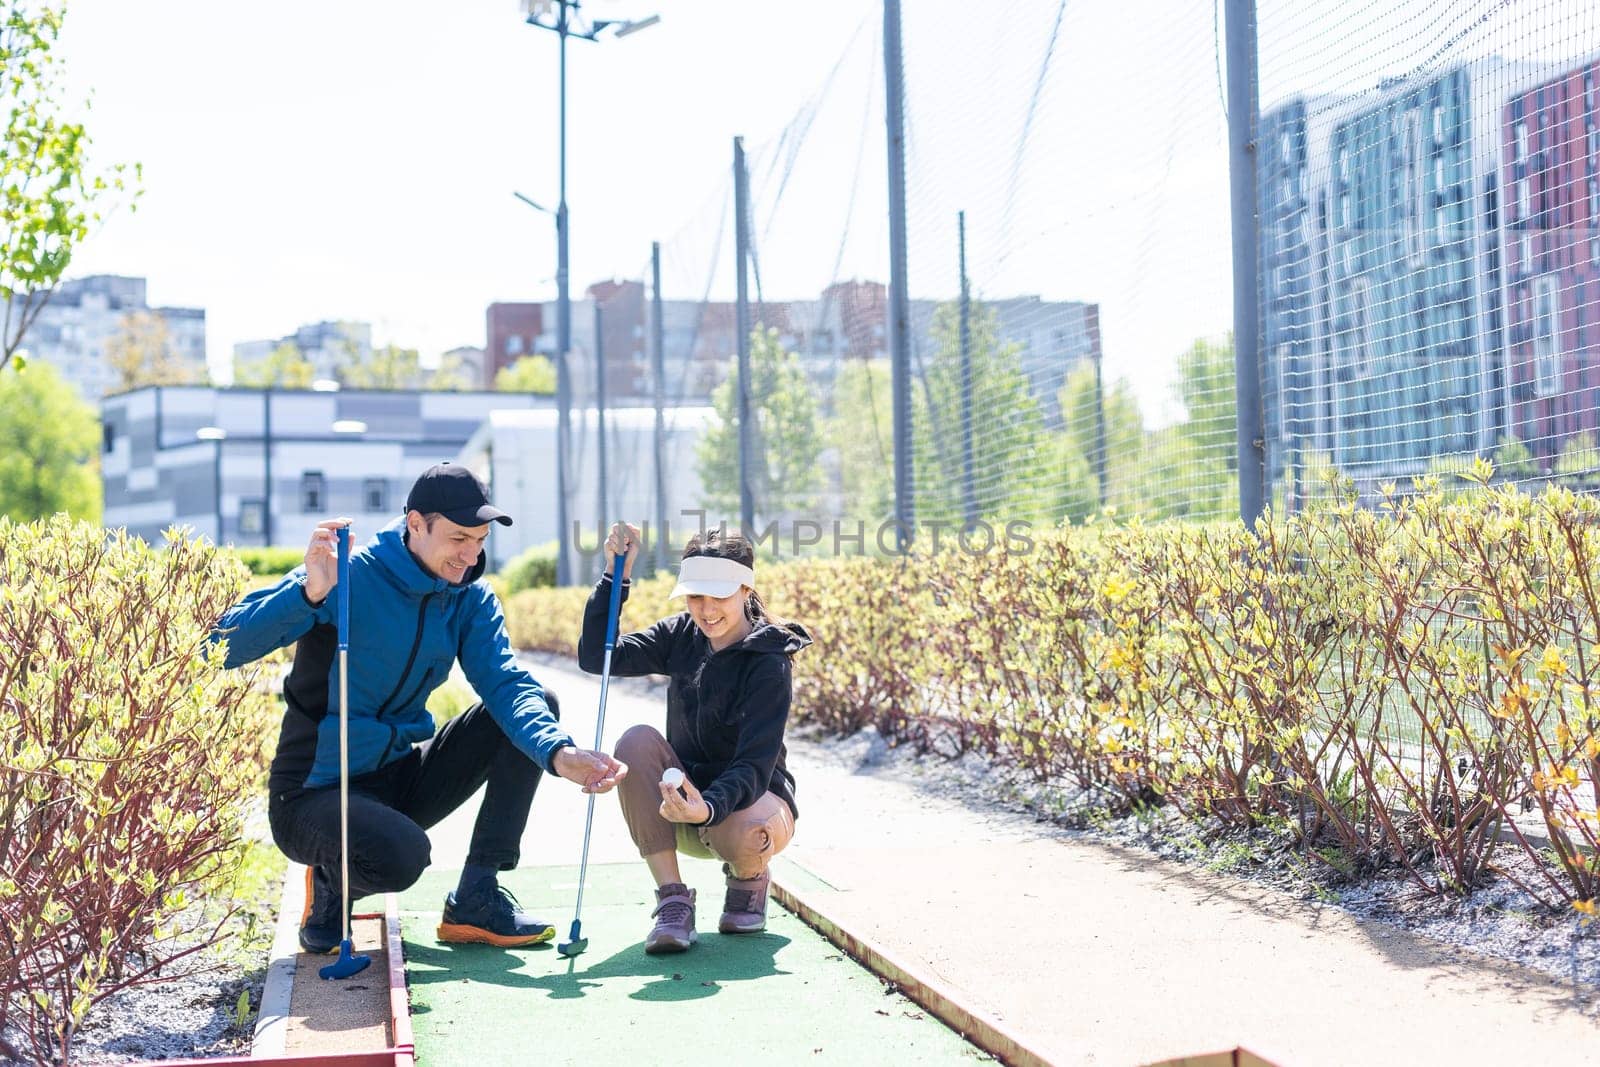 The girl is preparing to hit the ball with a golf club and looks at the man who is squatting next to her with the golf club in his hands. High quality photo